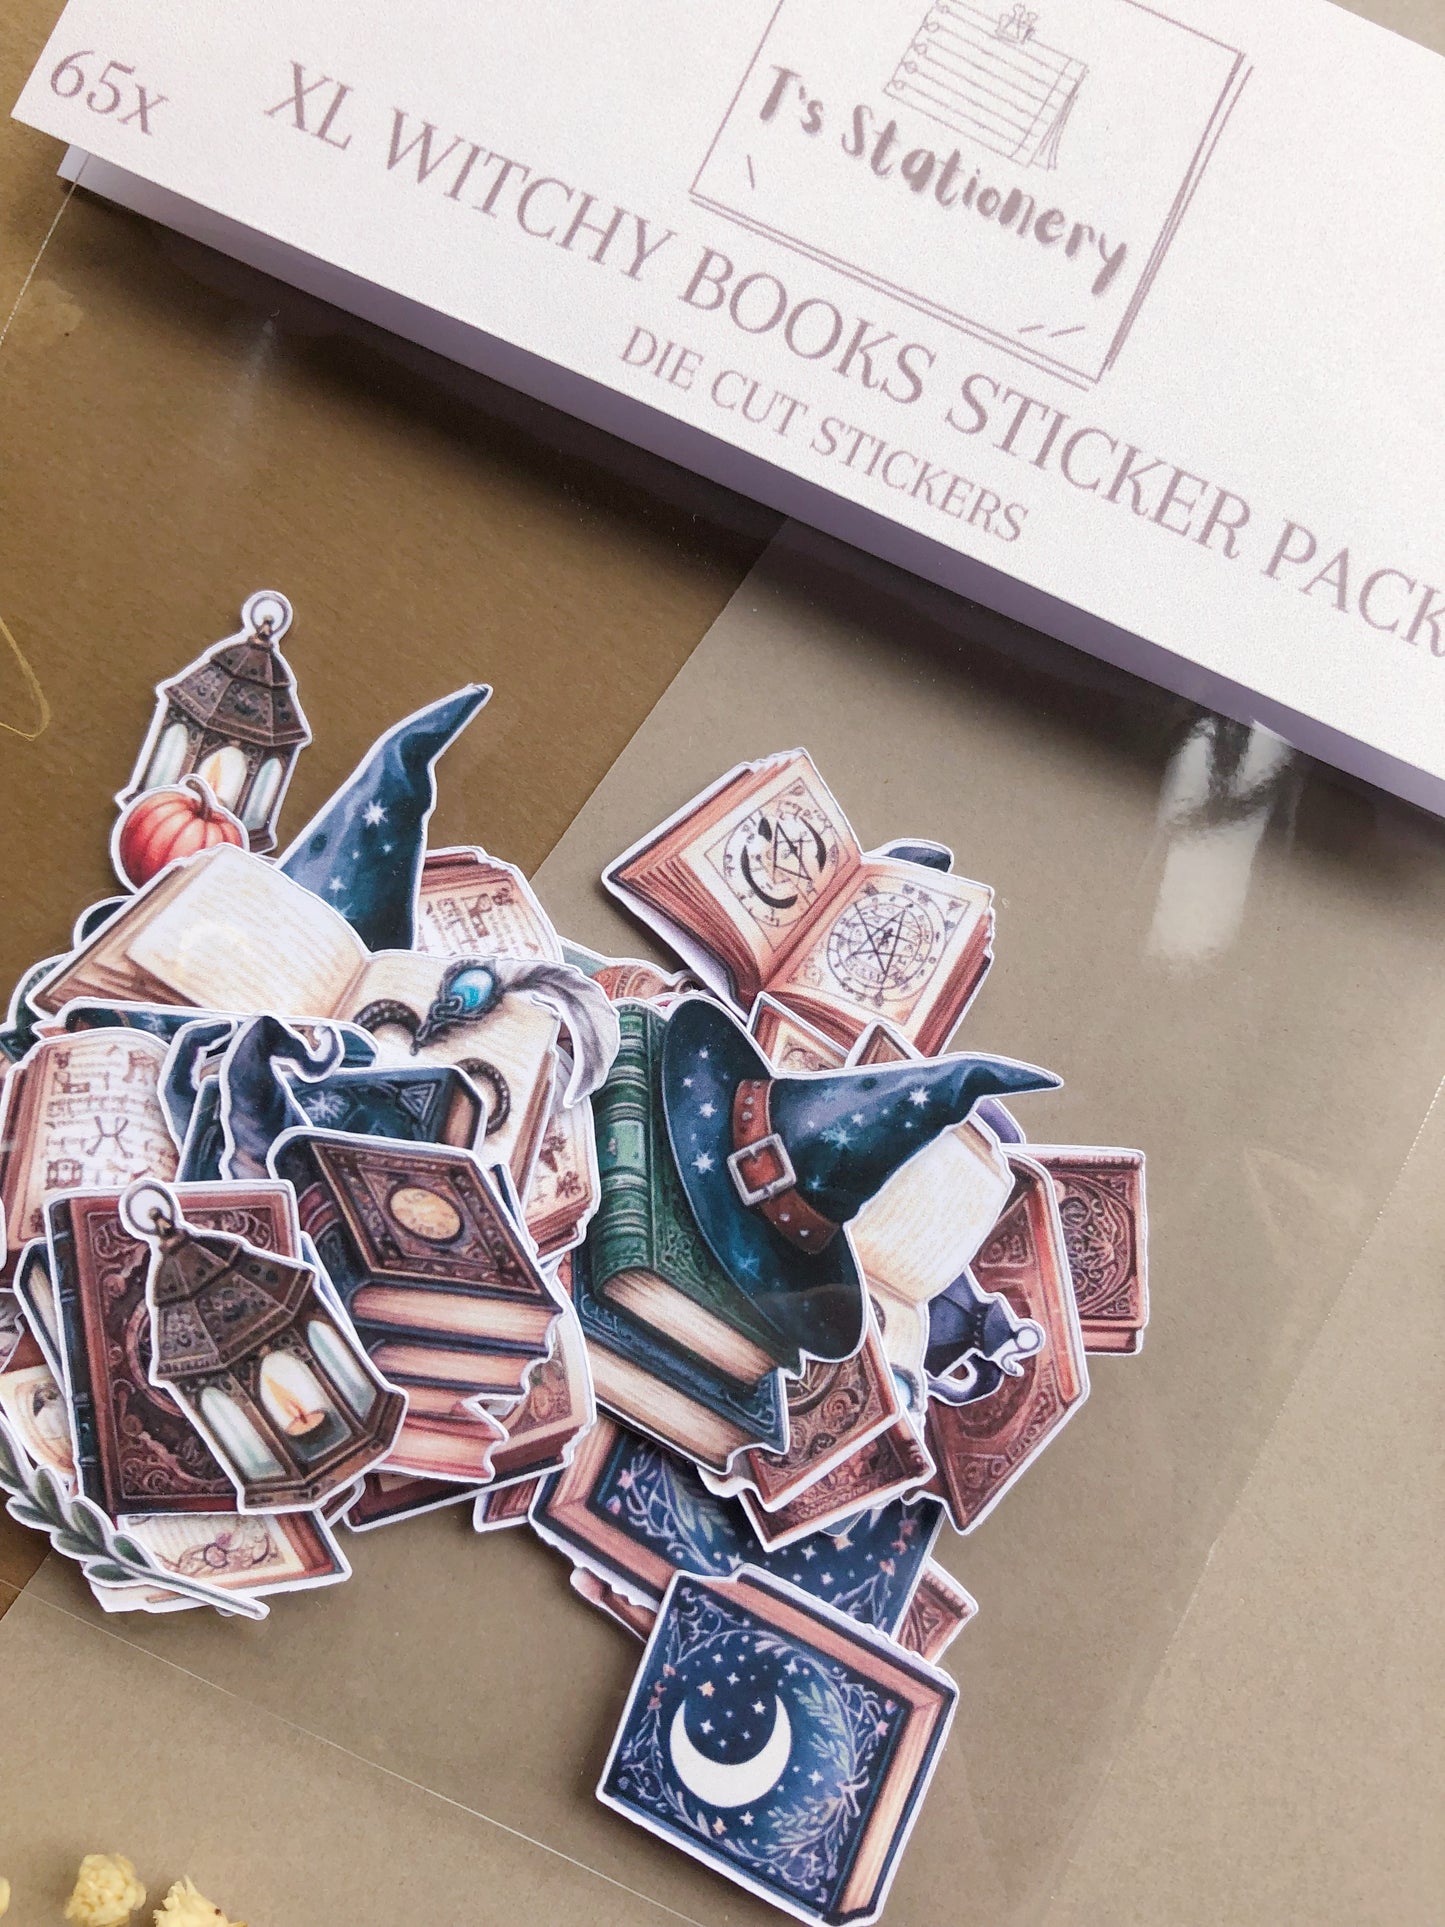 "65Pcs XL Witchy Books" Sticker Pack